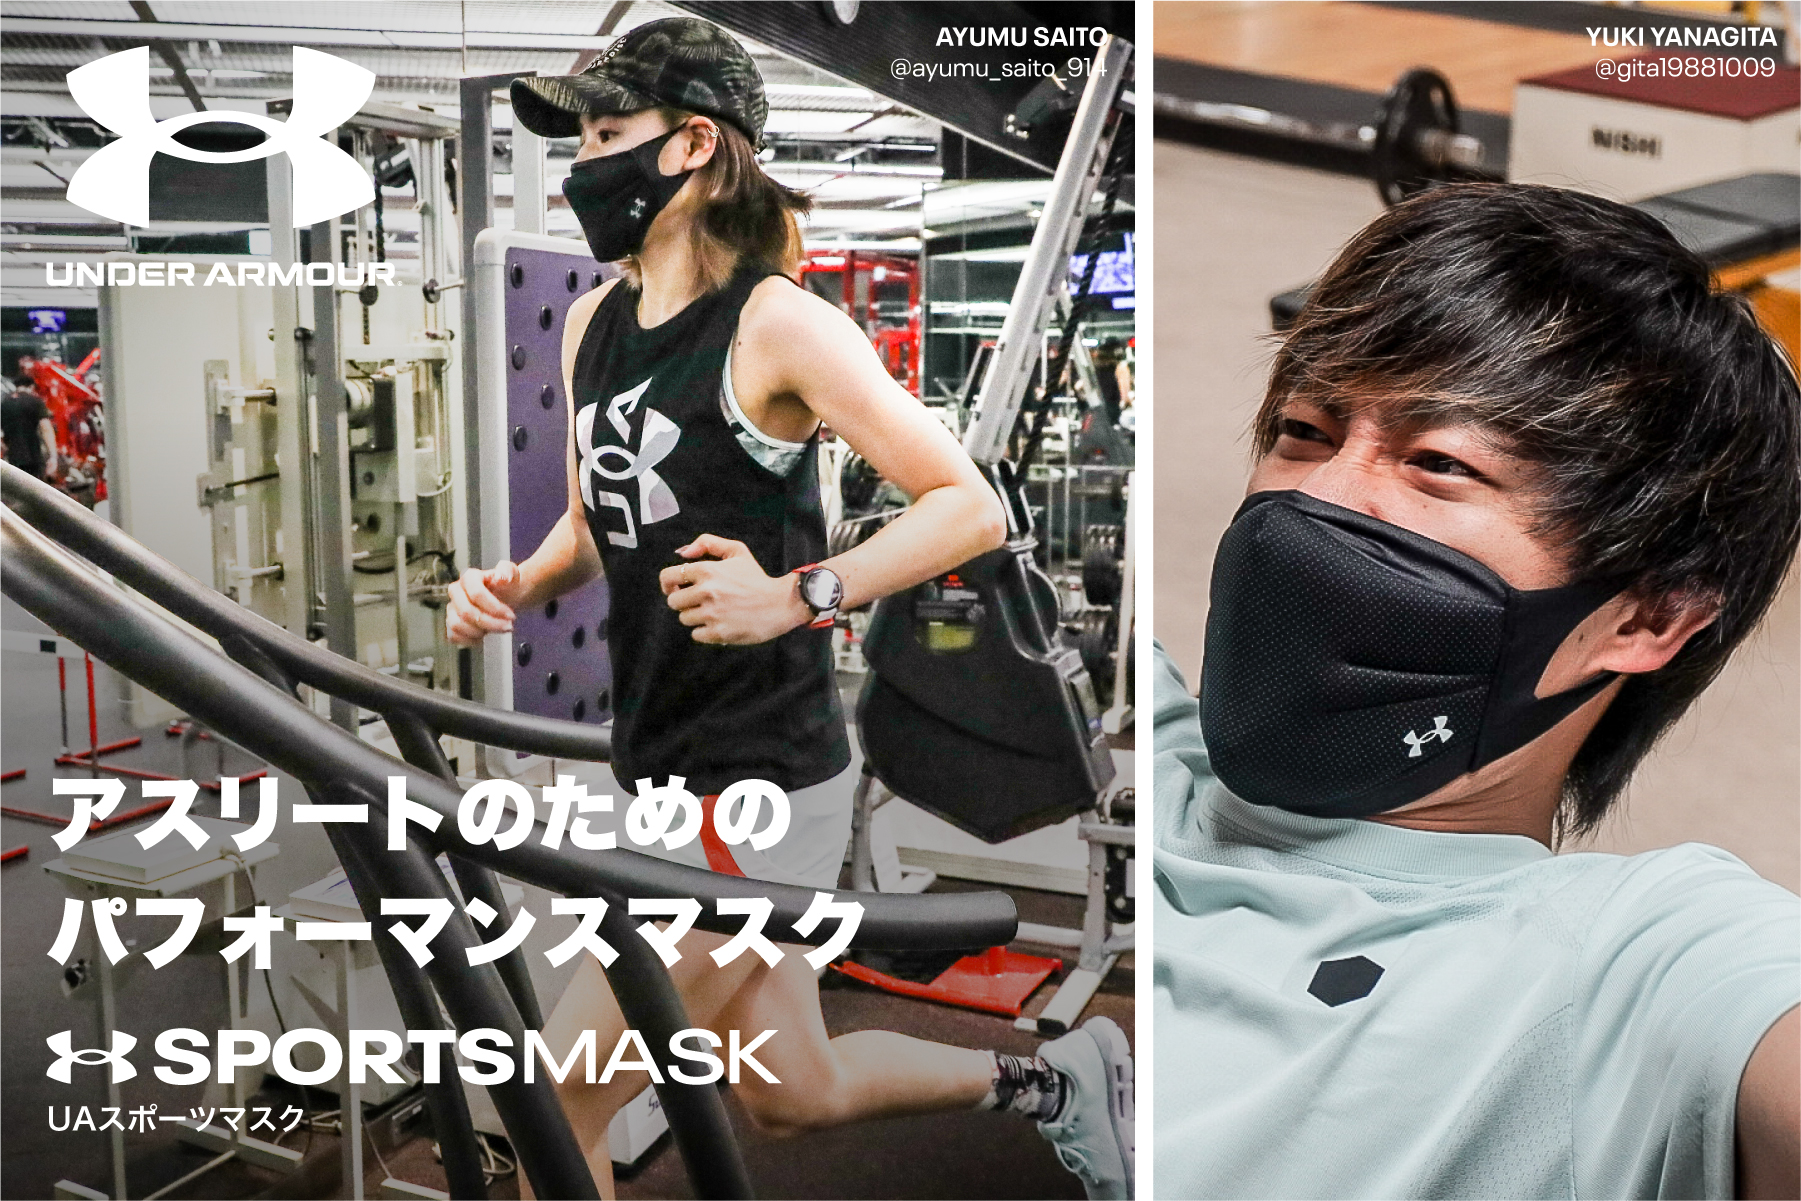 NEW ARRIVAL 新品‼️アンダーアーマー マスク黒 under armour mask S M